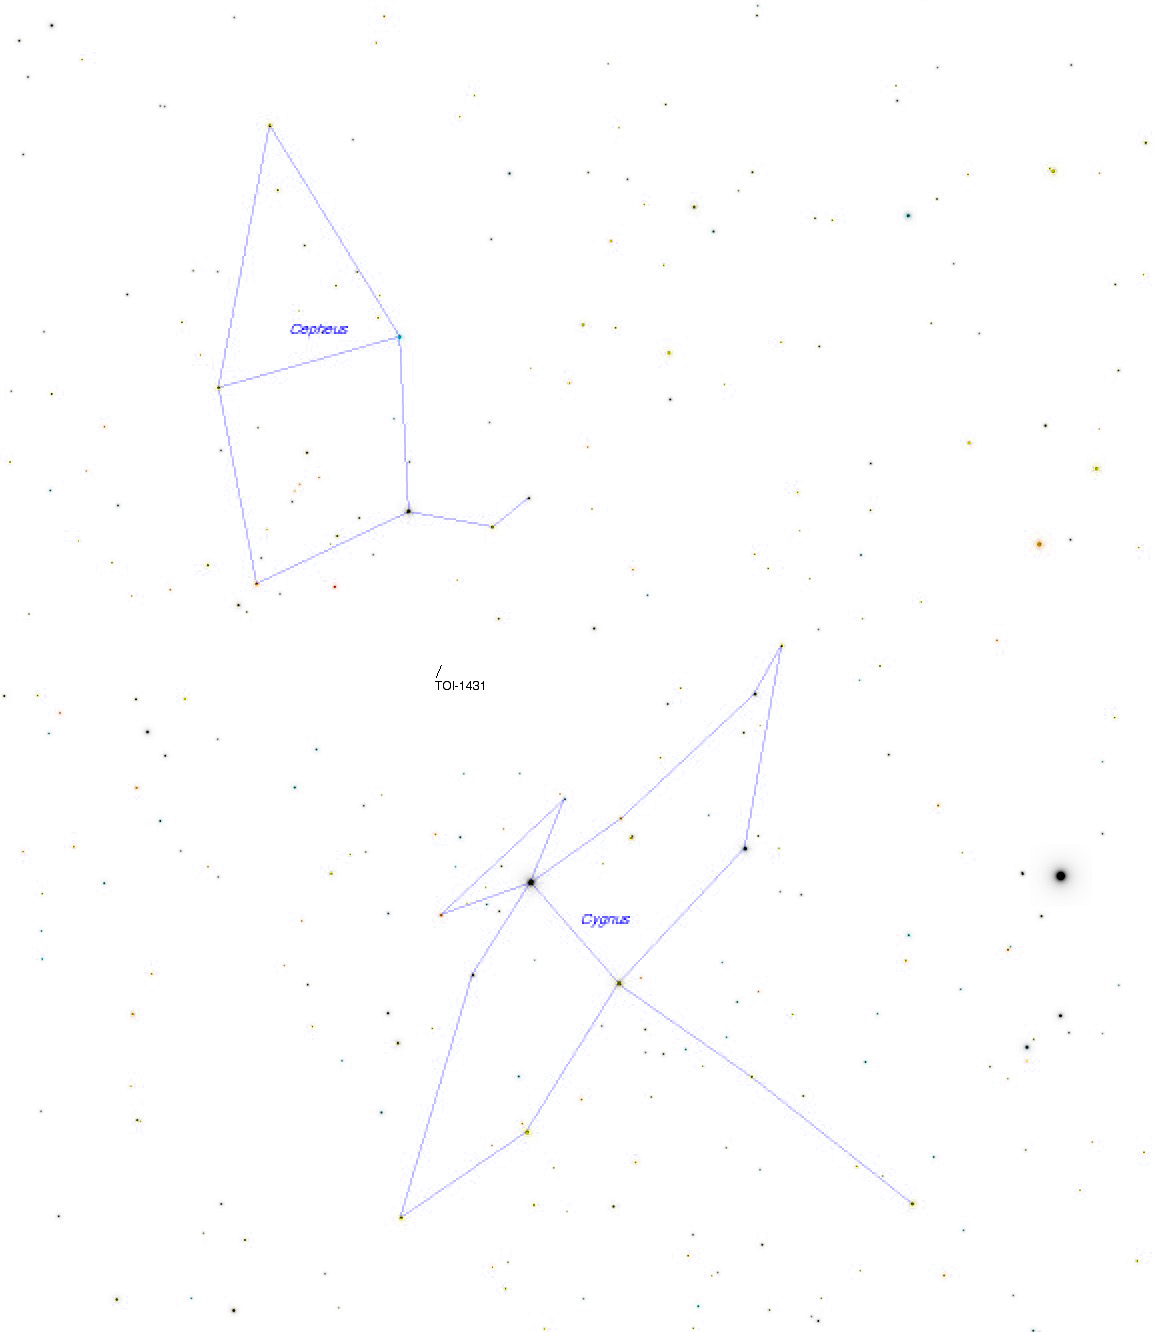 TOI-1431 is positioned halfway between the constellations of Cepheus and Cygnus. Map: Voyager/OJK